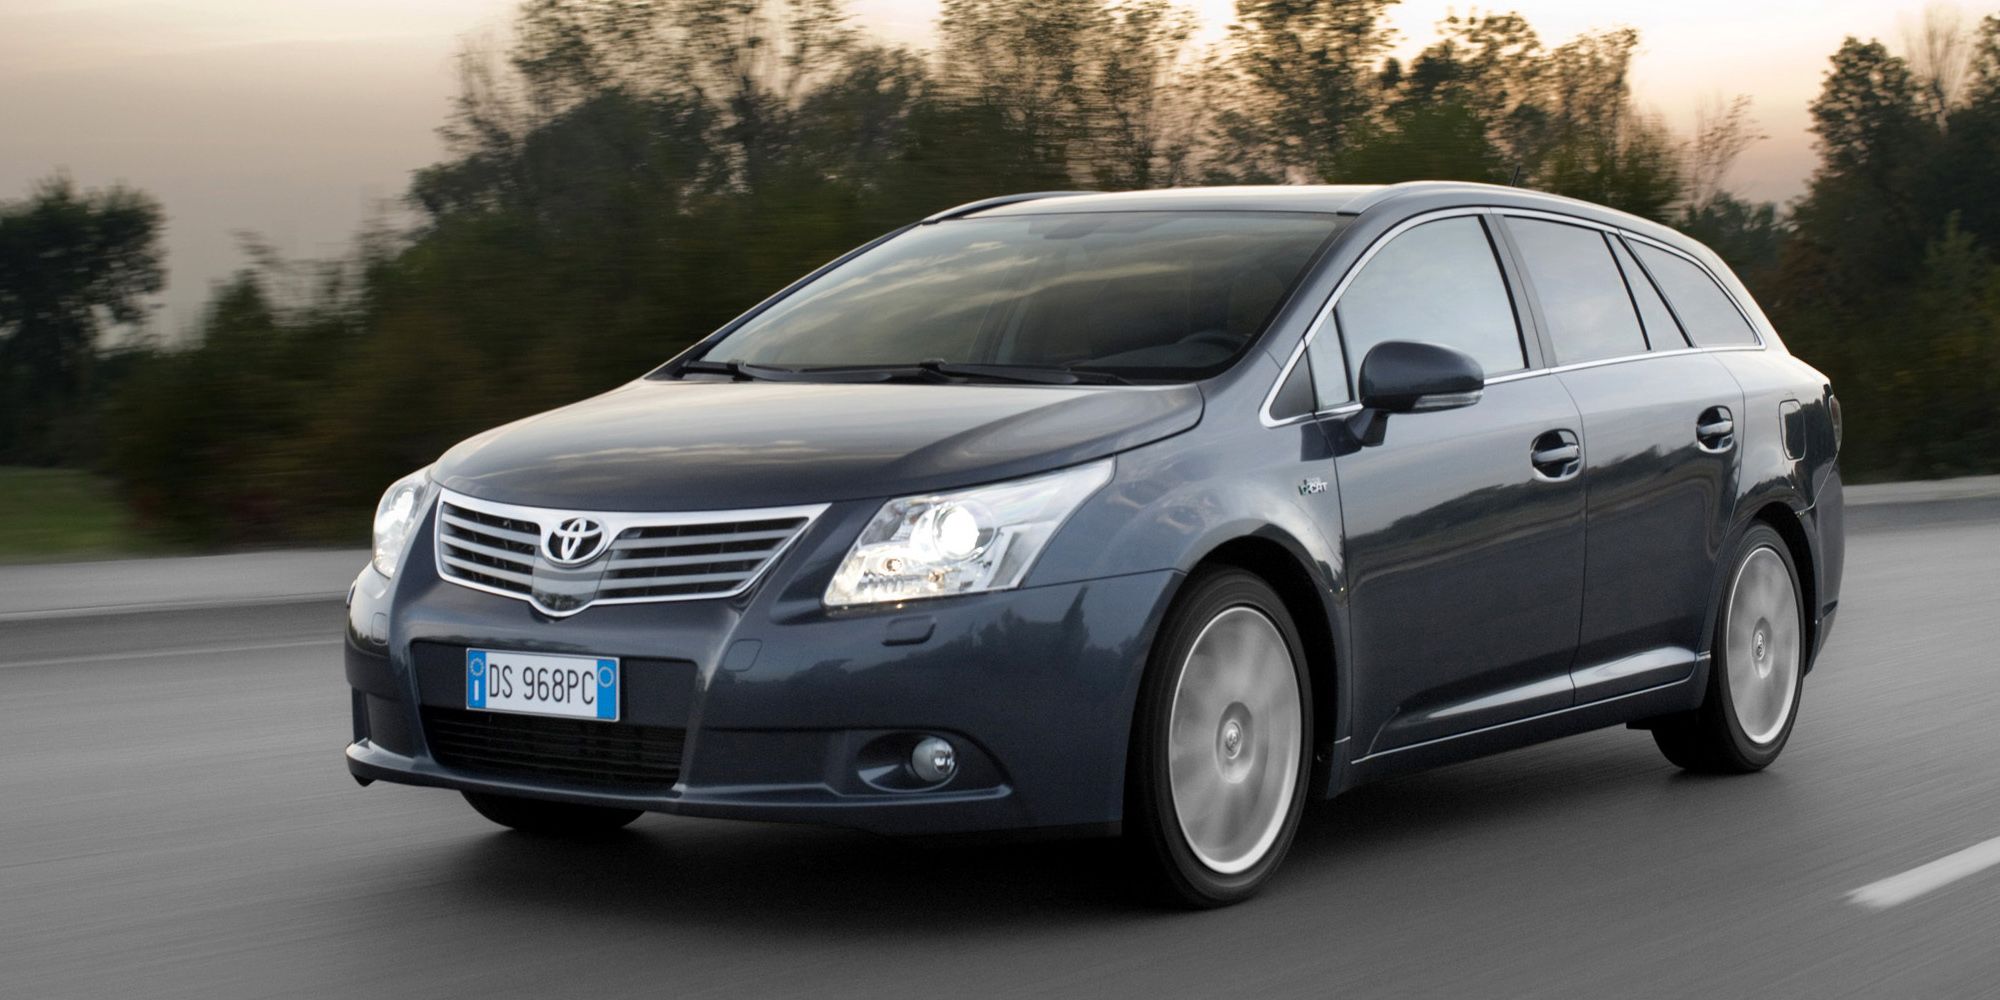 Front 3/4 view of a dark blue Avensis Wagon on the move